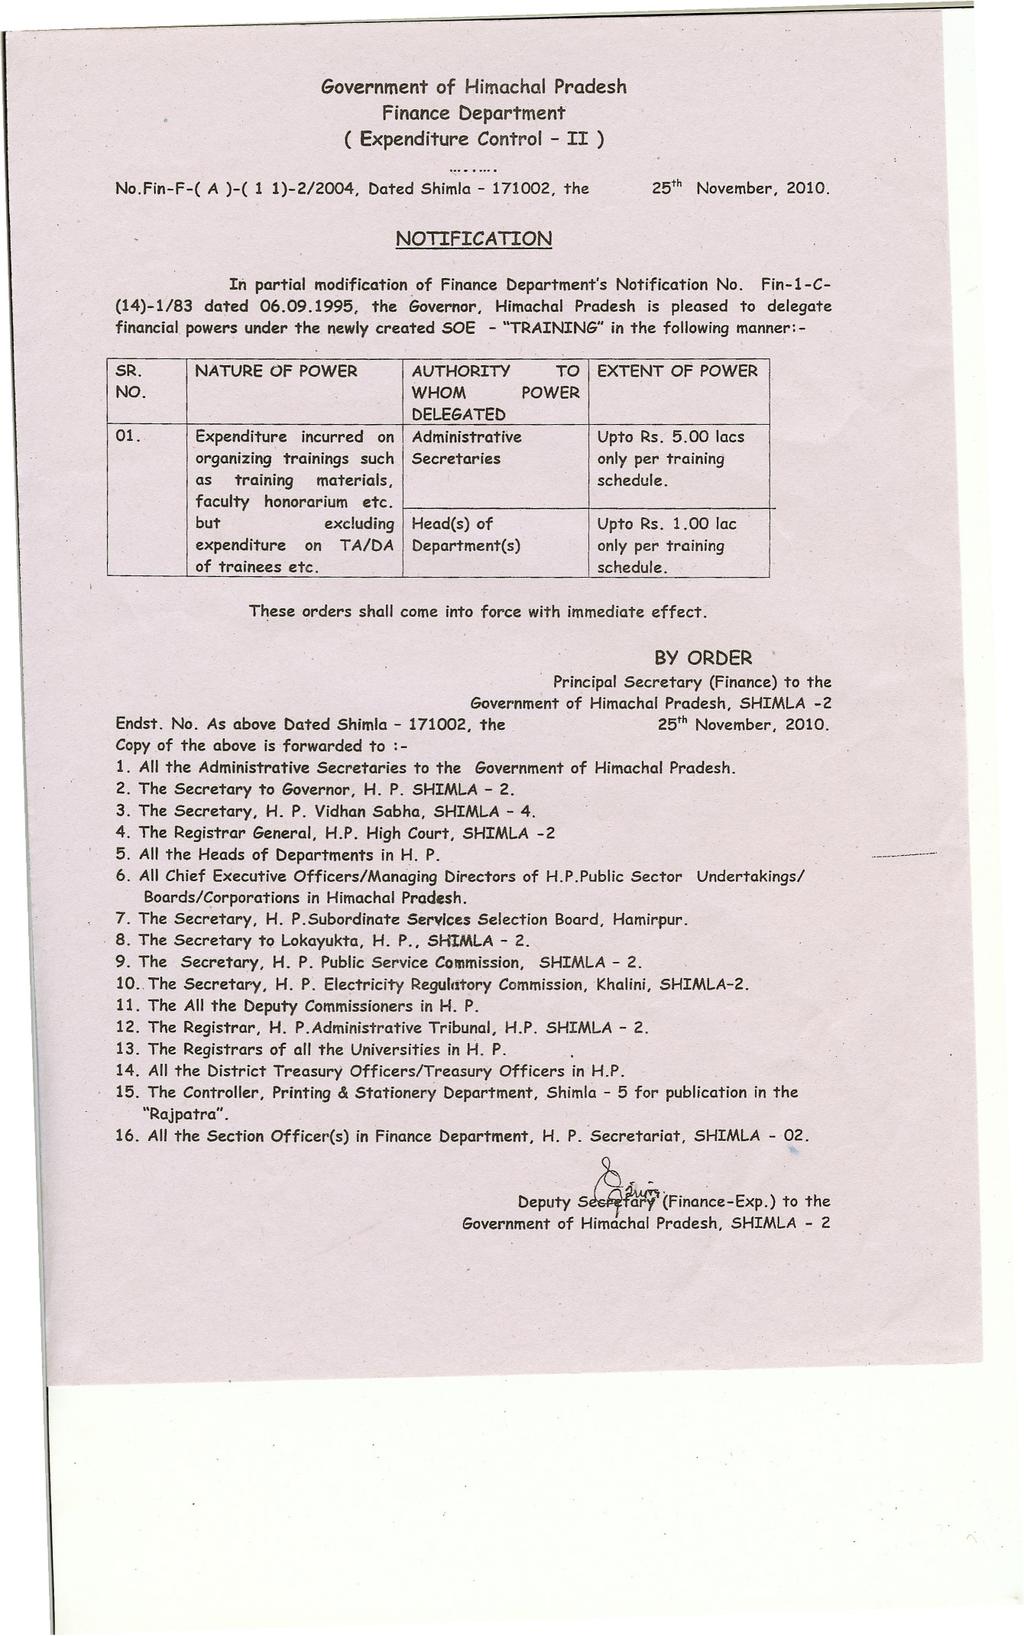 -~- - ----- ---- - Government of Himachal Pradesh Finance Department ( Expenditure Control - II ) No.Fin-F-( A )-( 1 1)-2/2004, Dated Shimla - 171002, the 25th November, 2010.